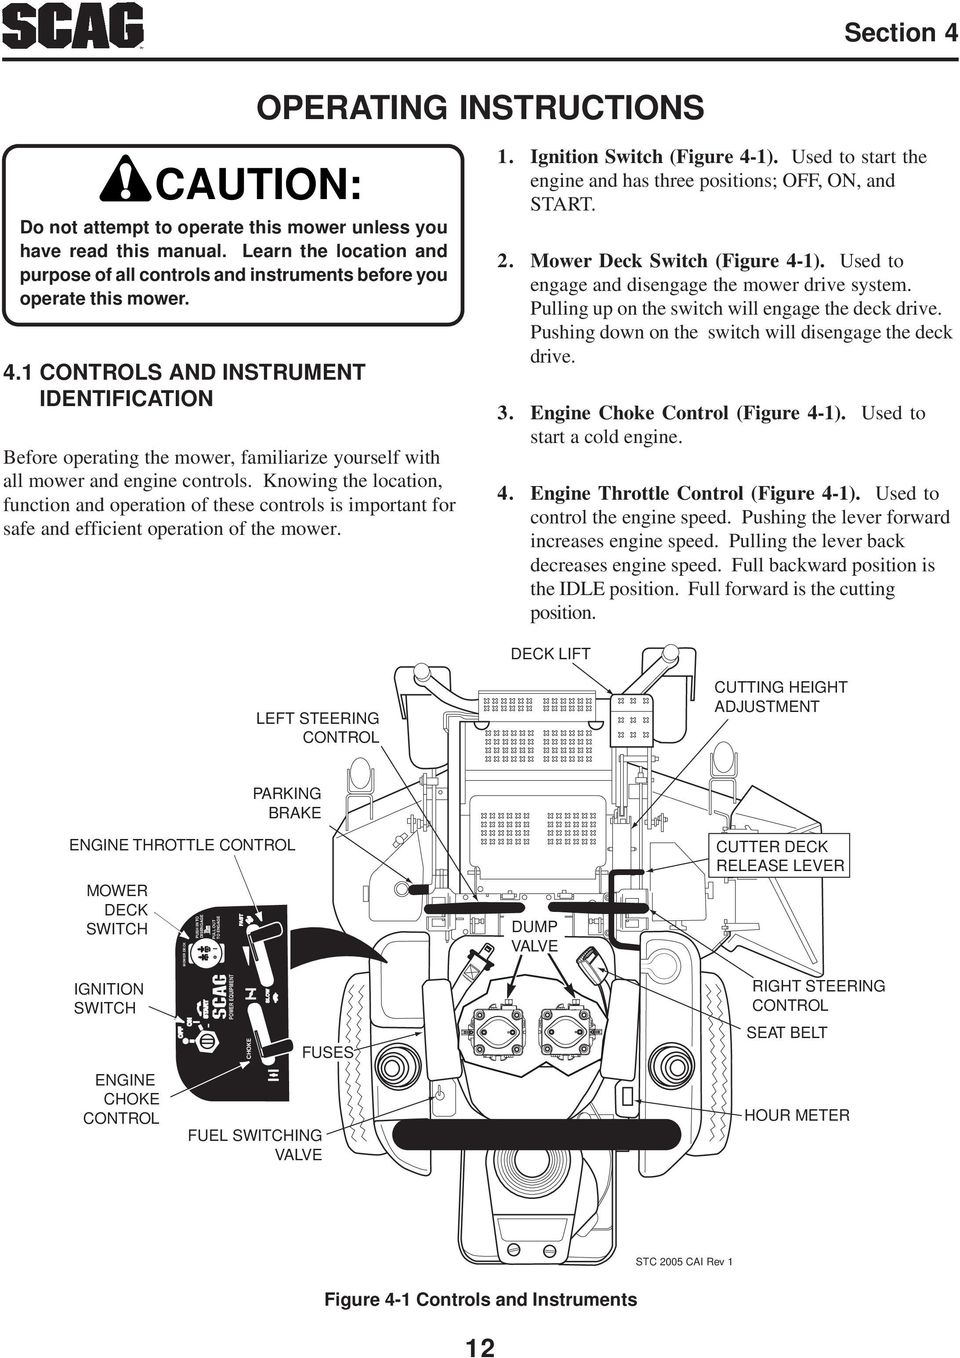 1 CONTROLS AND INSTRUMENT IDENTIFICATION Before operating the mower, familiarize yourself with all mower and engine controls.